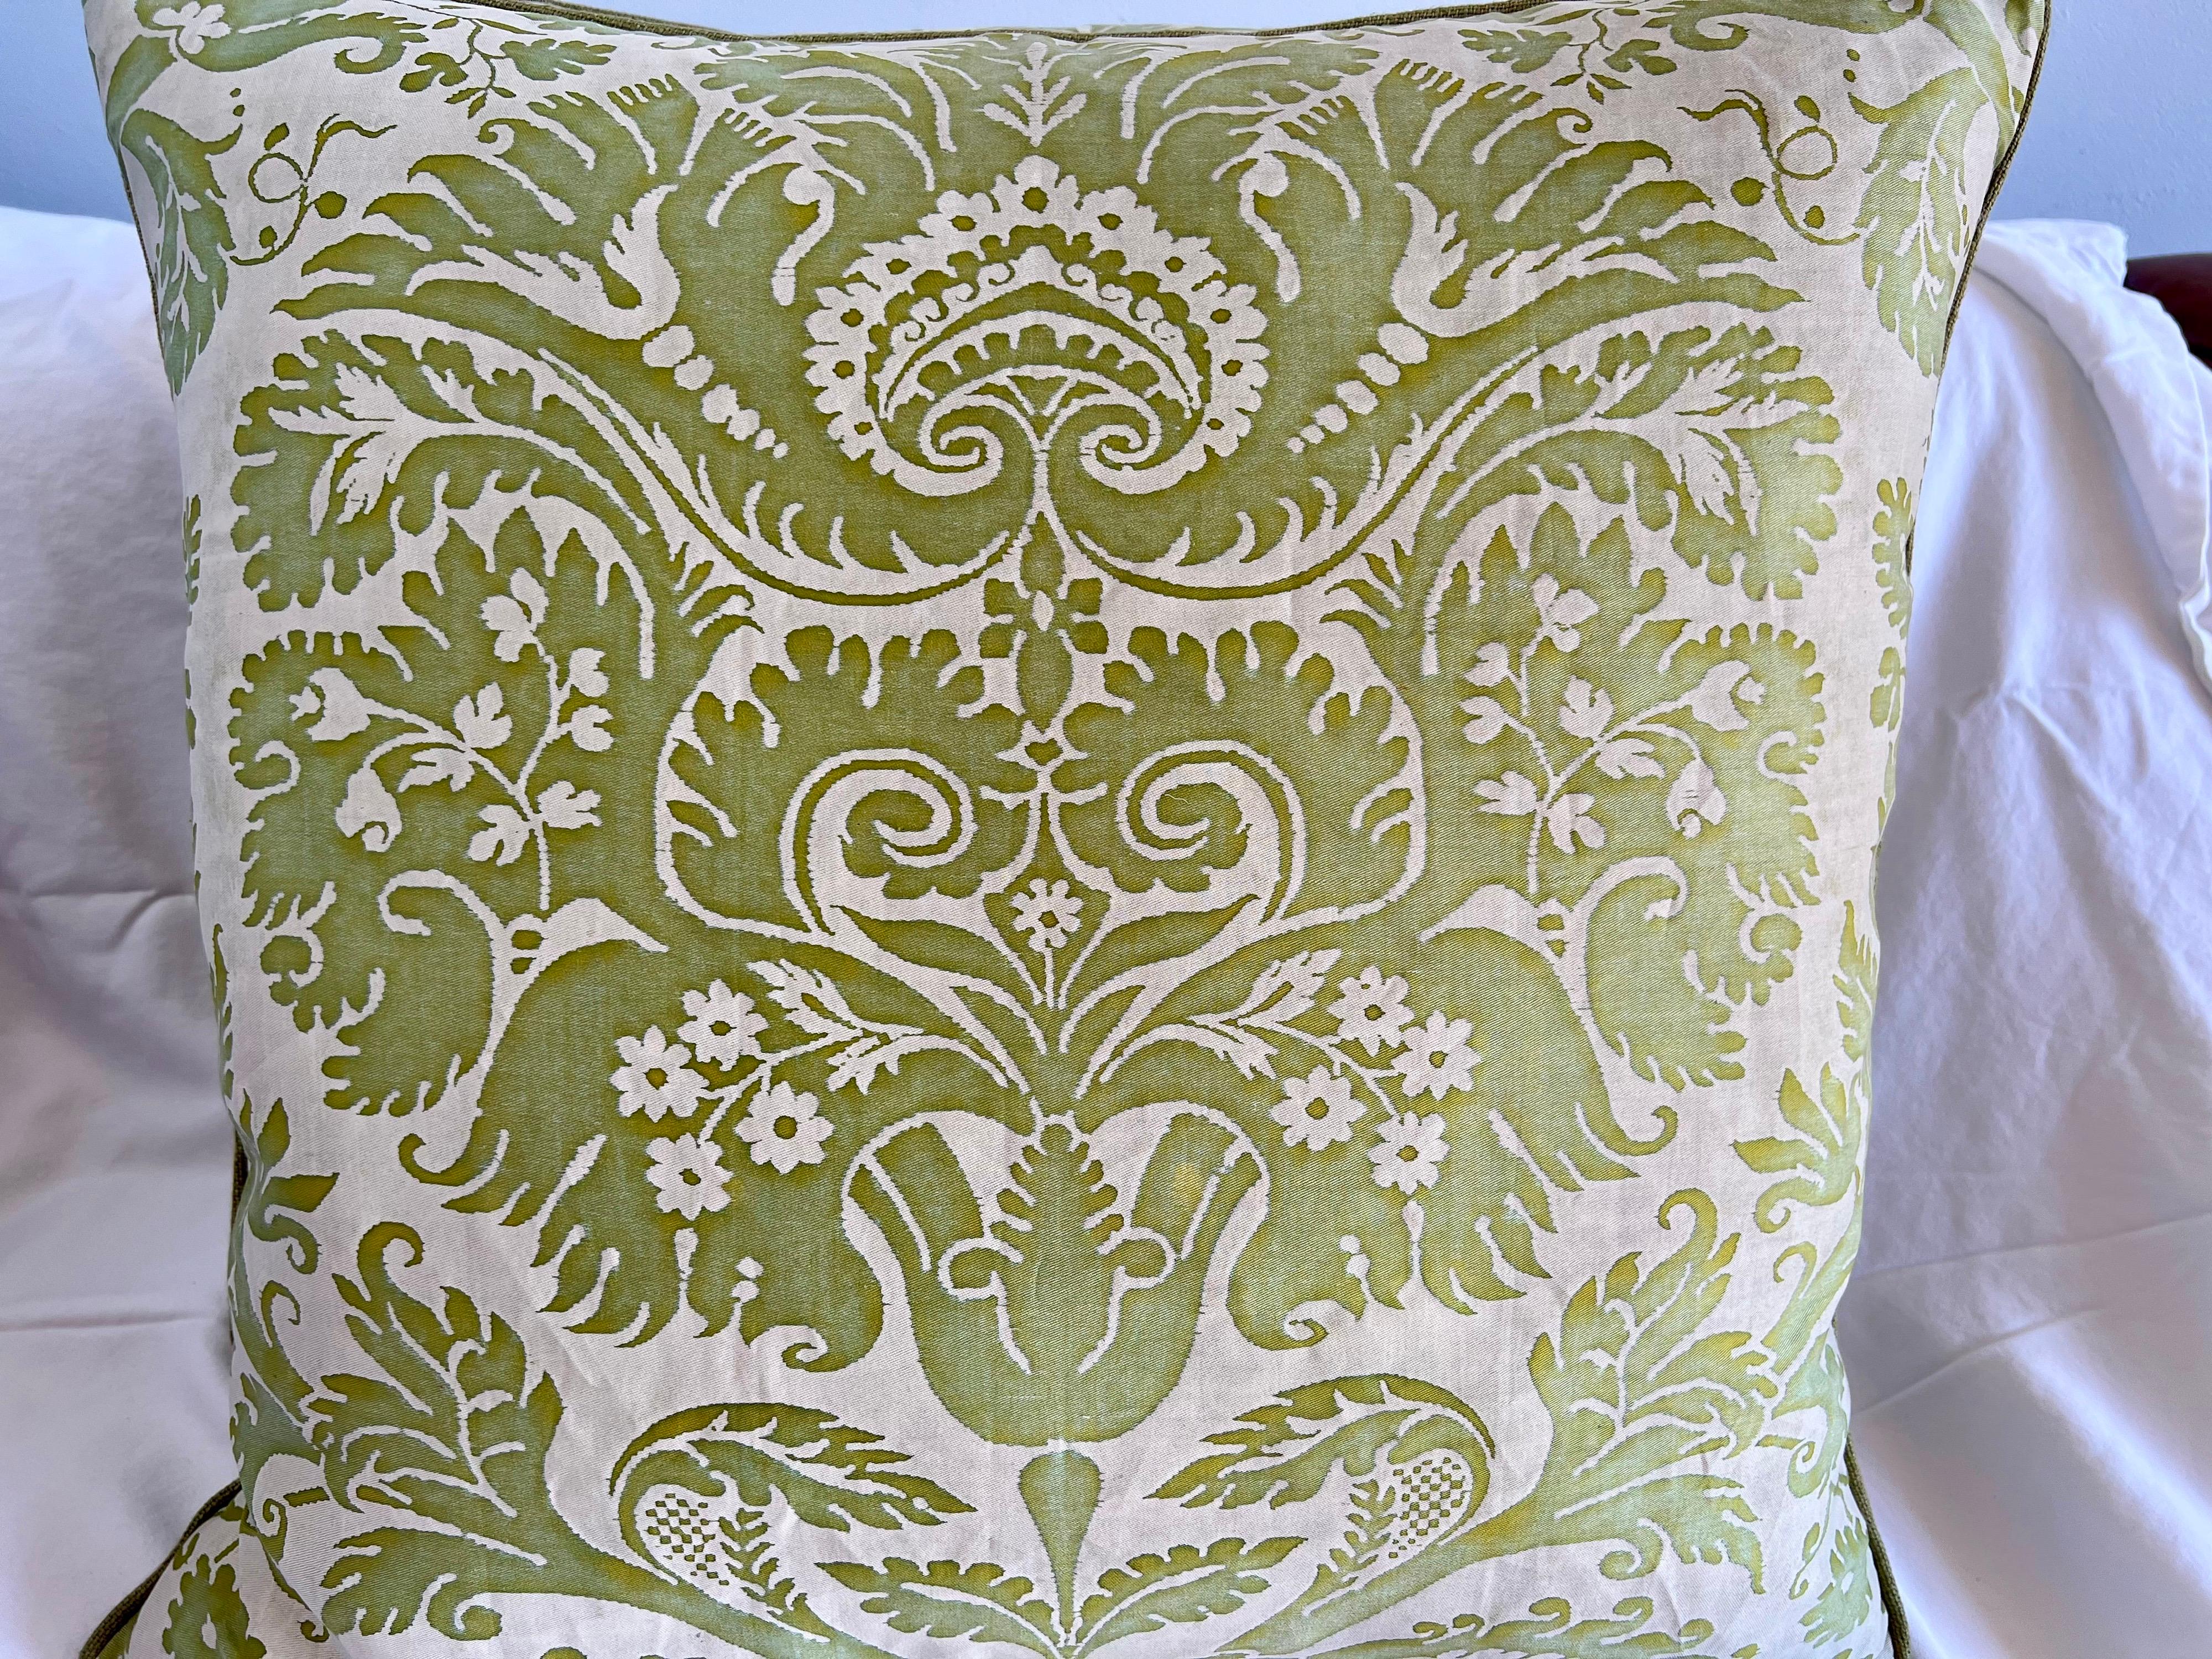 Cotton Pair of Green Orsini Patterned Fortuny Pillows